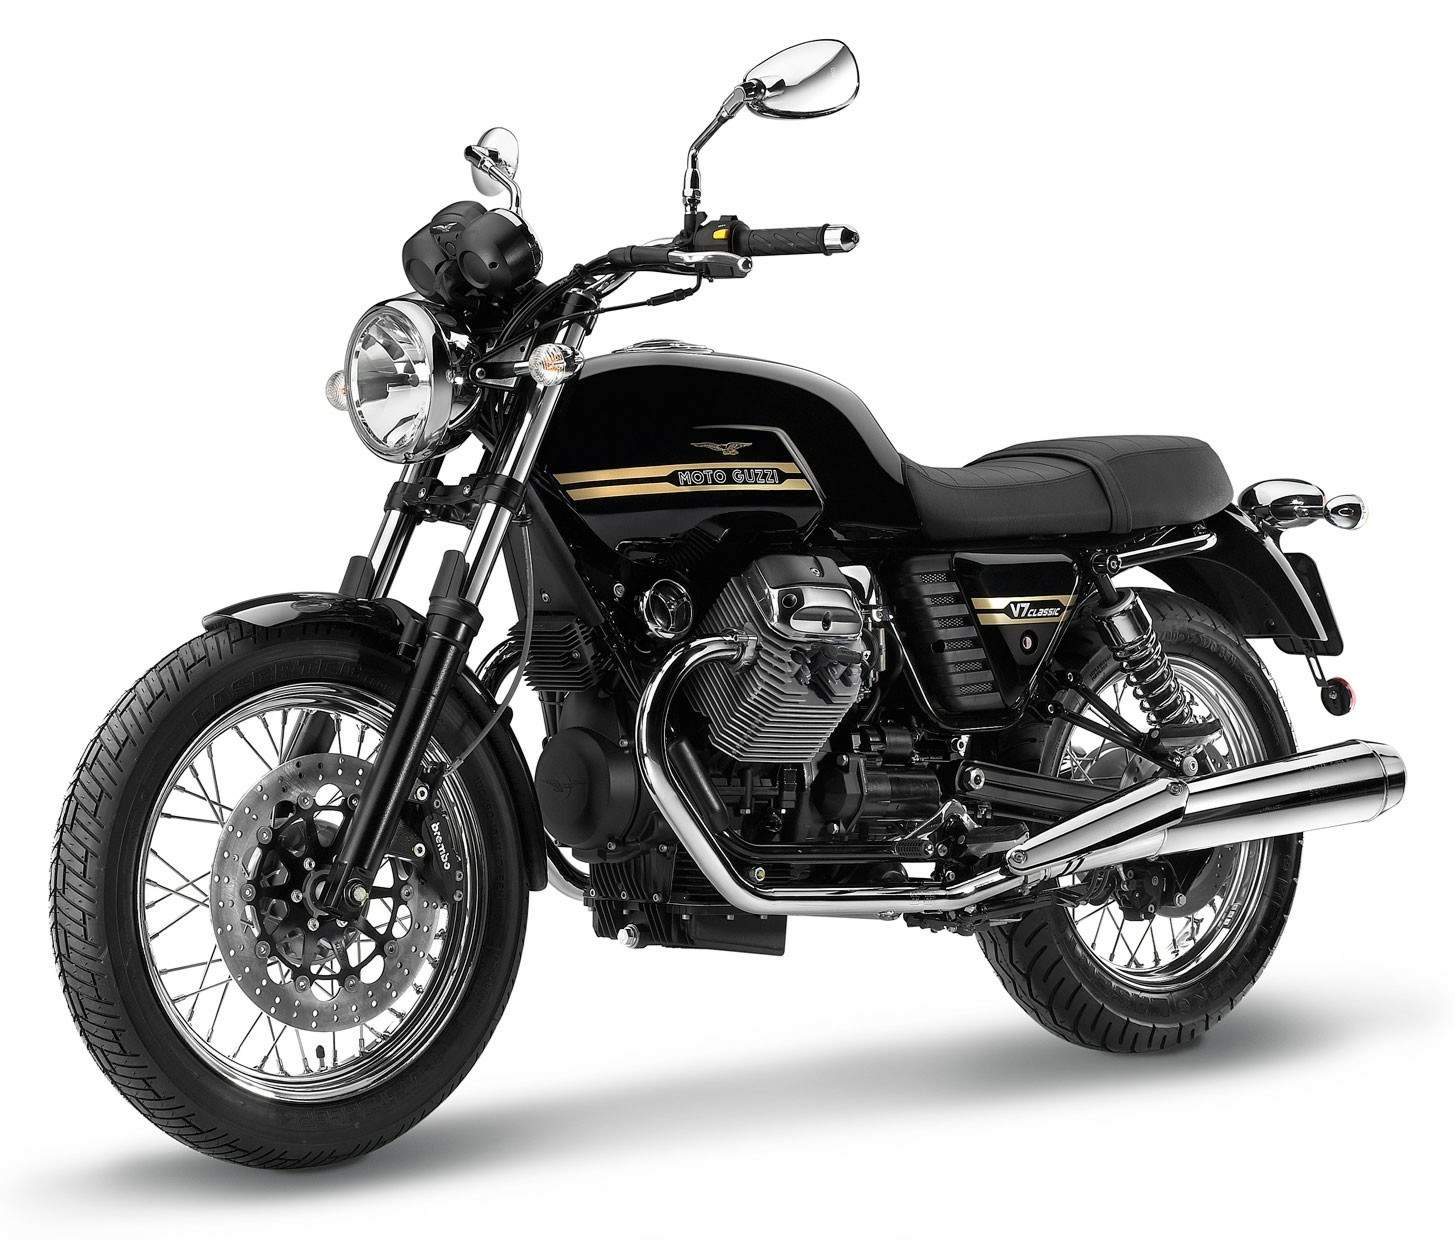 Moto Guzzi Classic Review: Timeless Elegance on Two Wheels